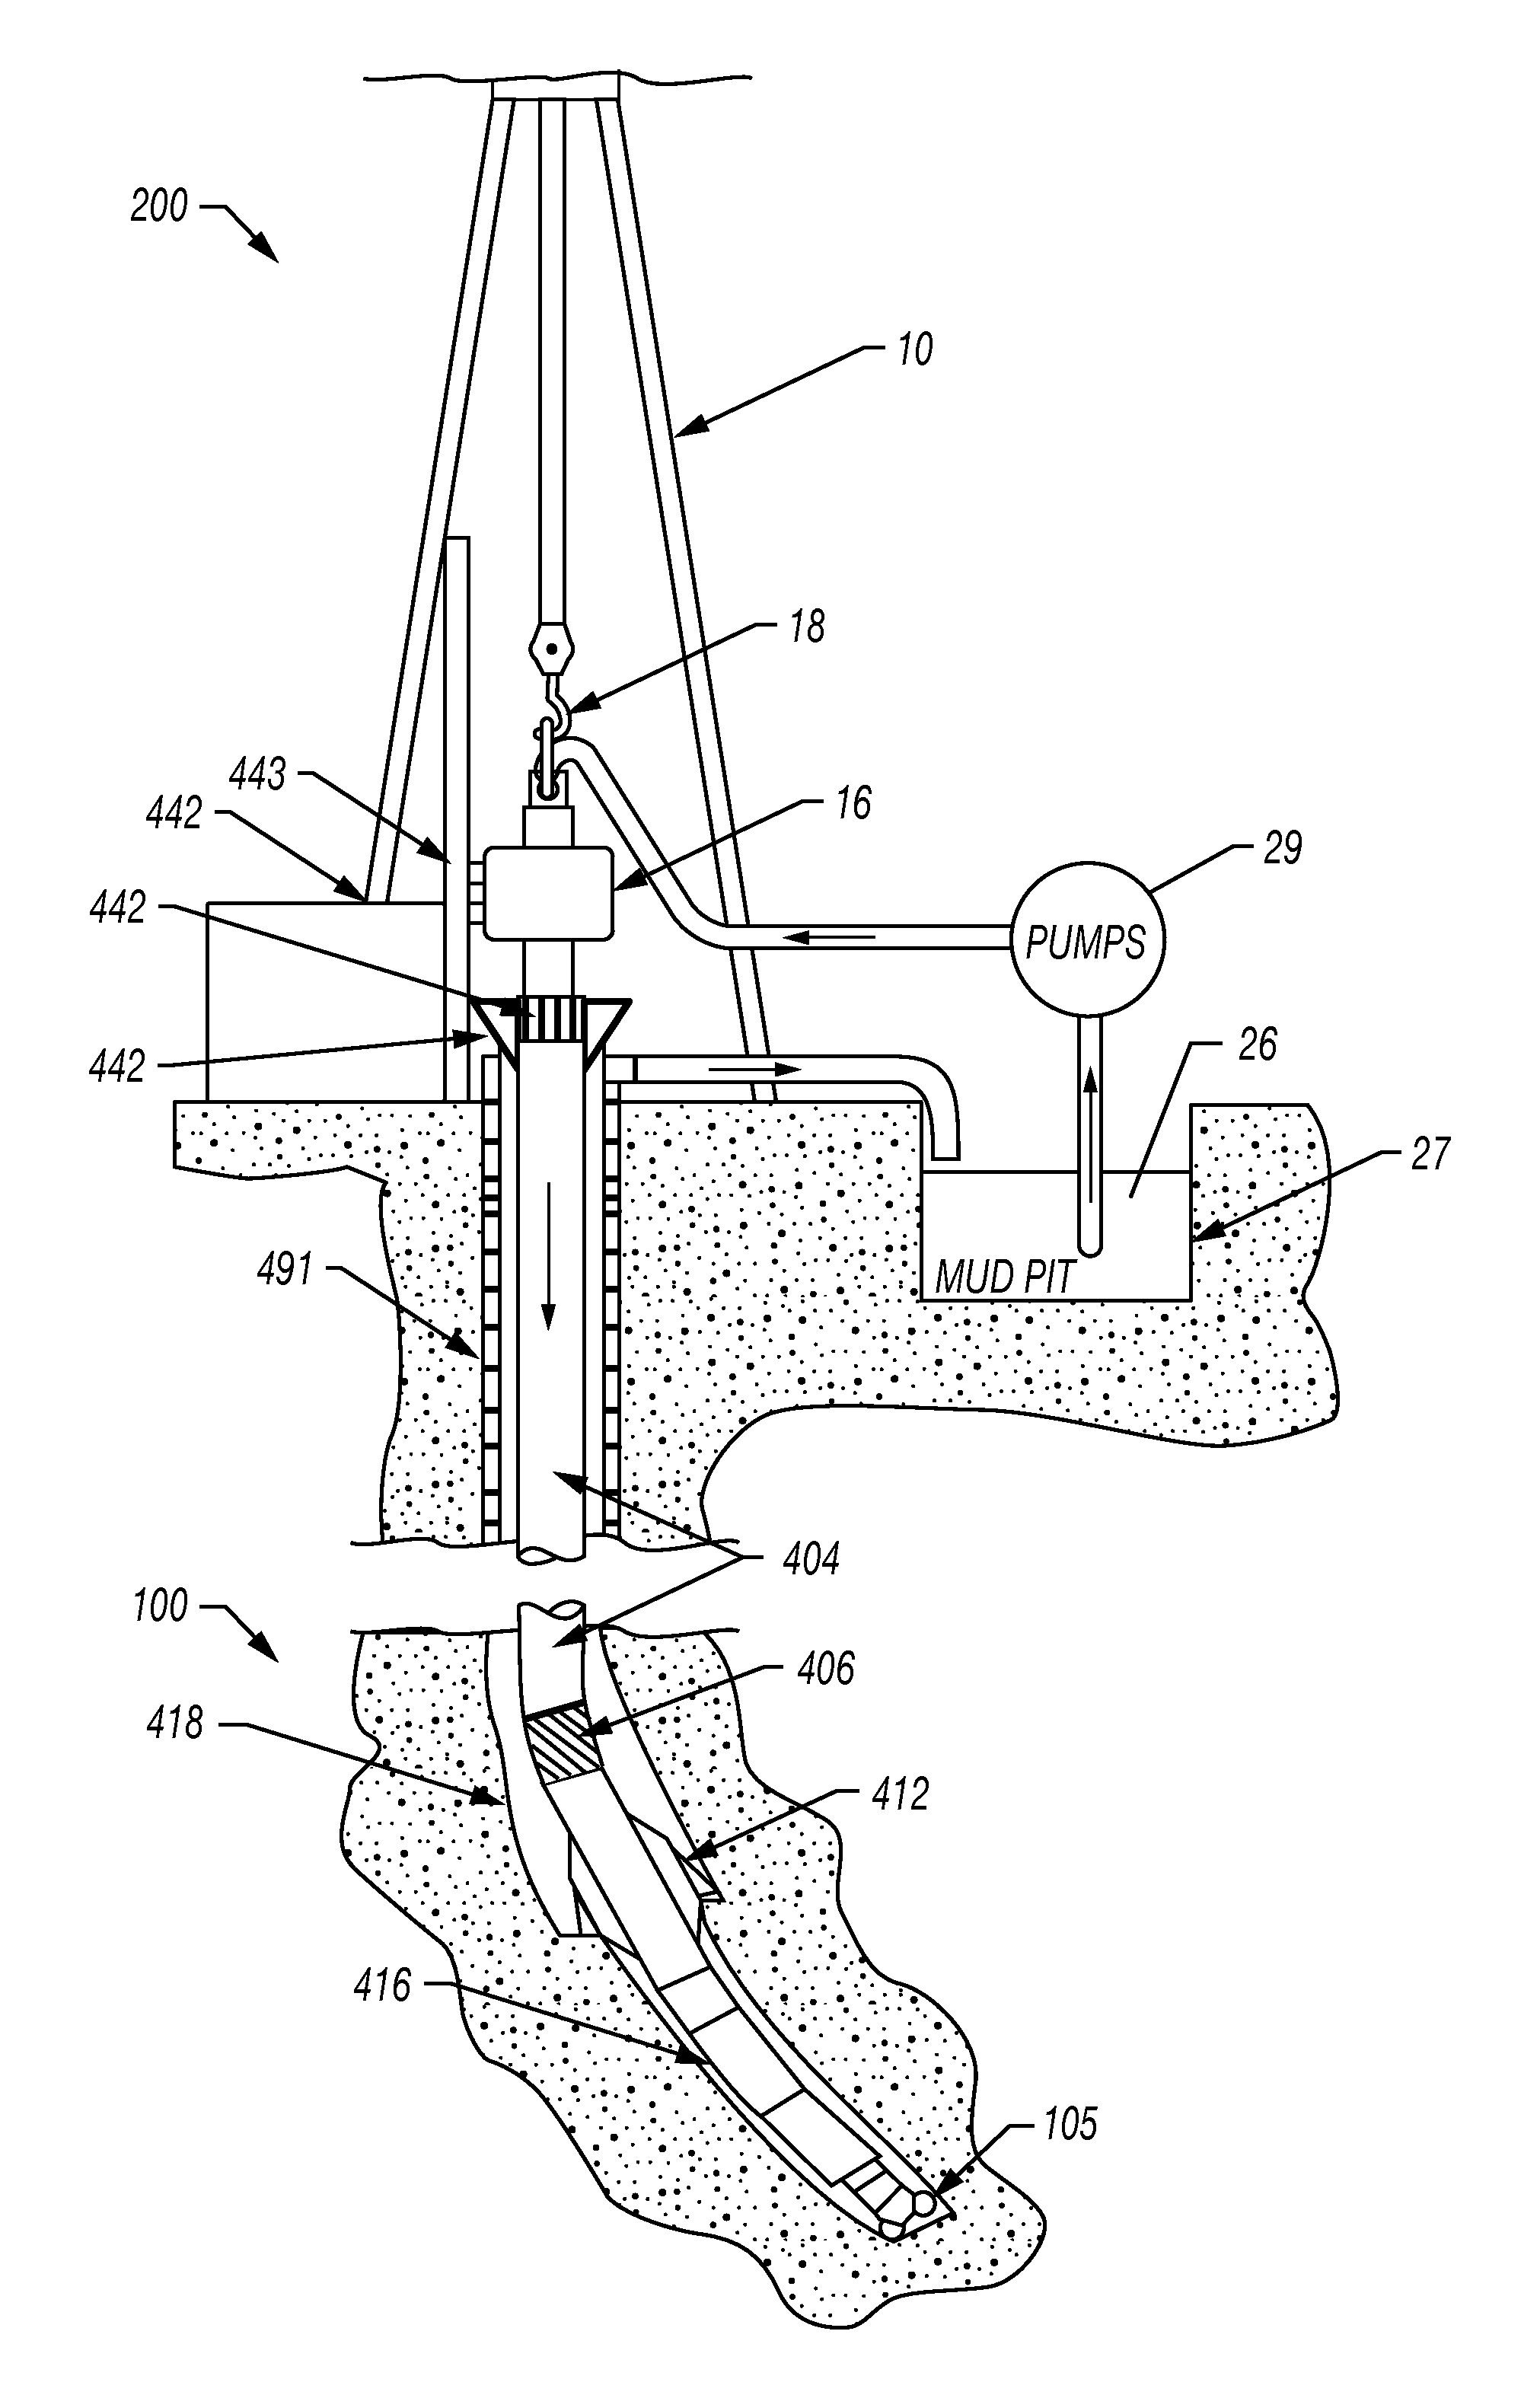 Casing Drilling Bottom Hole Assembly Having Wireless Power And Data Connection